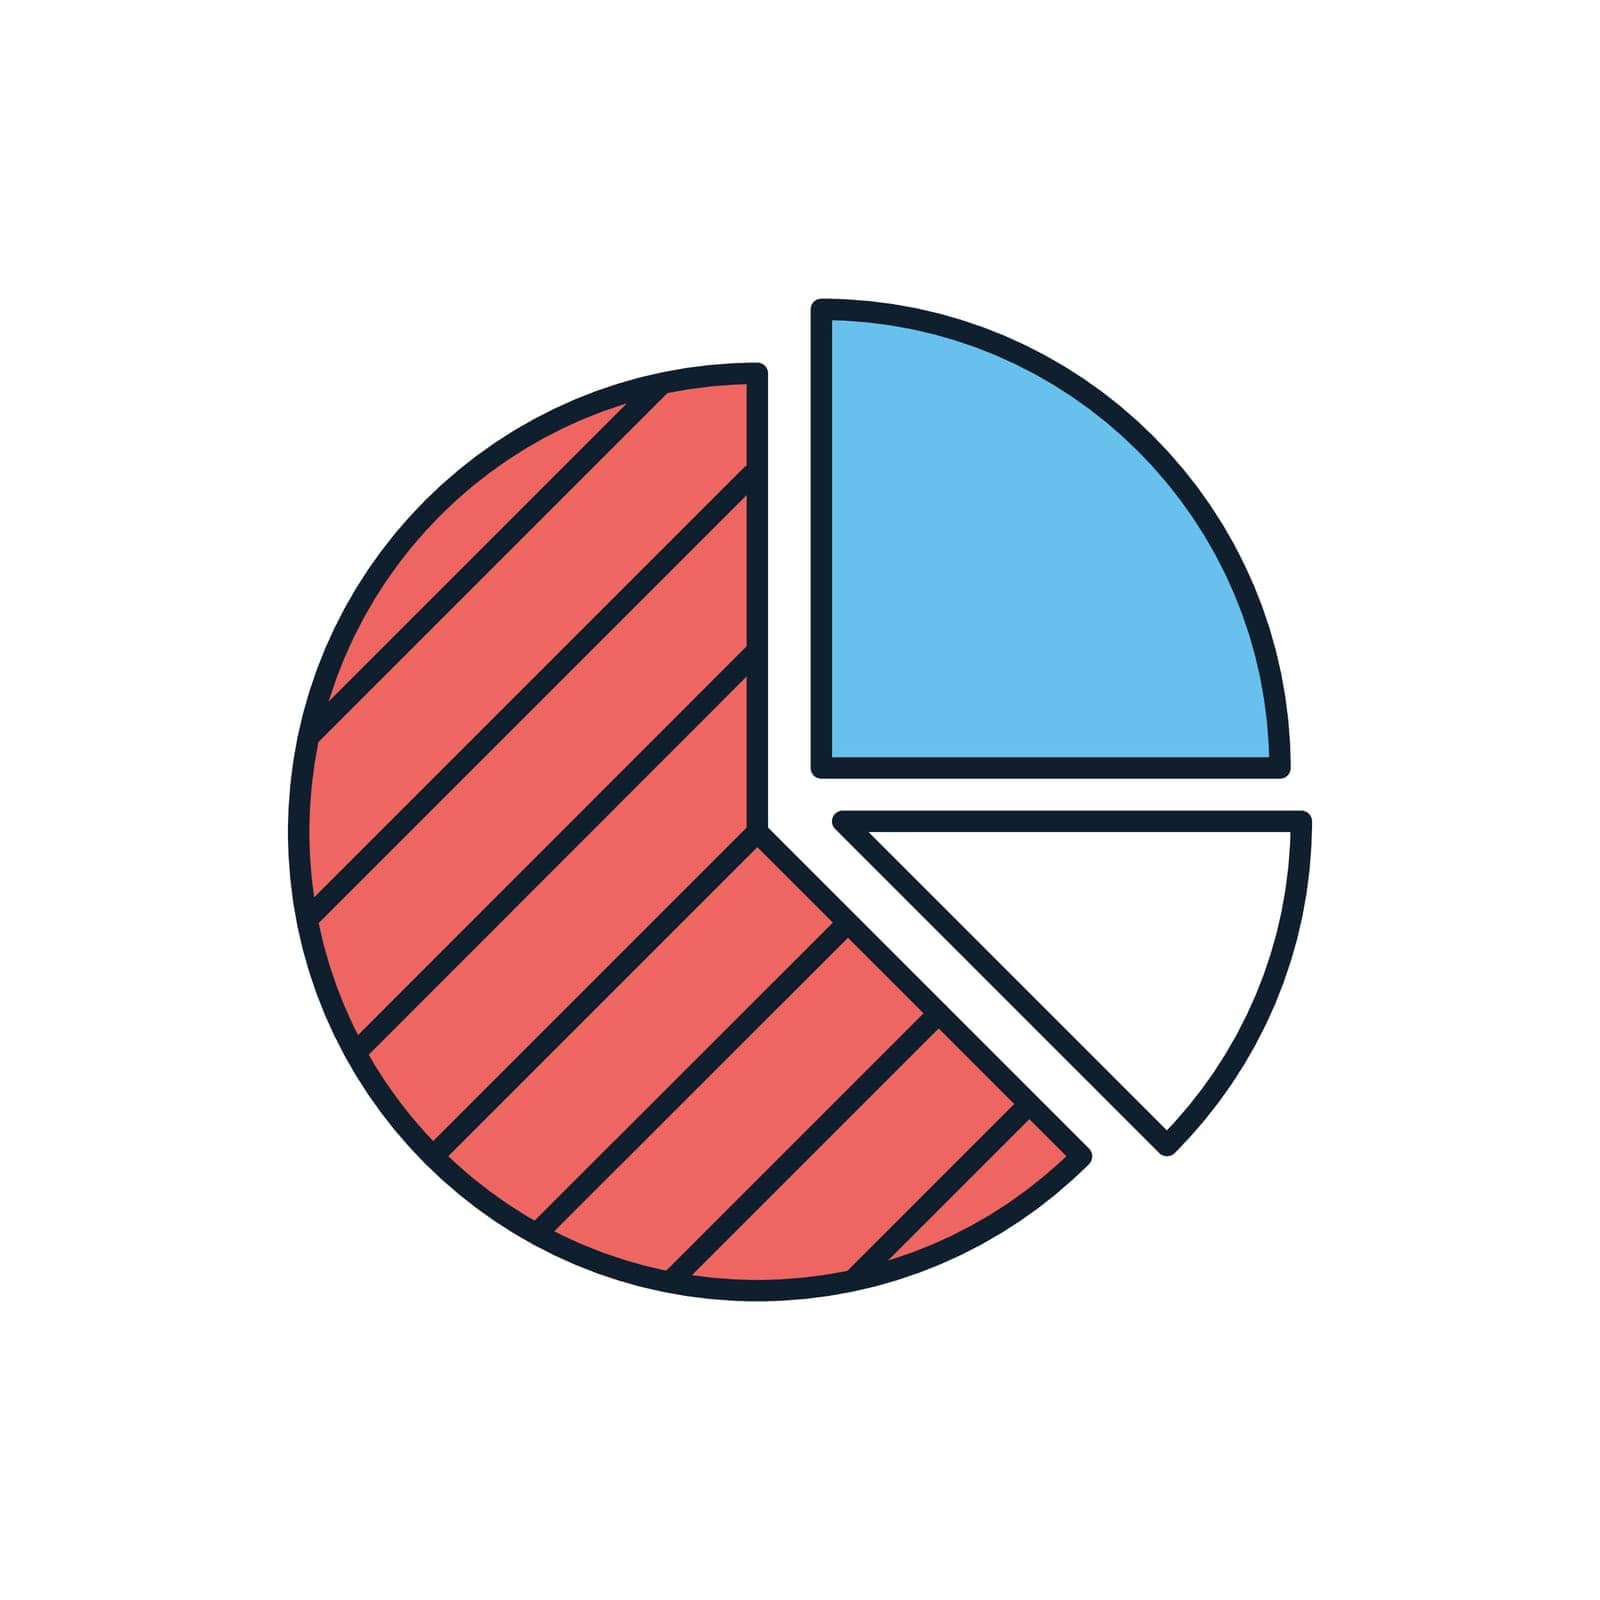 Pie Chart related vector icon by smoki